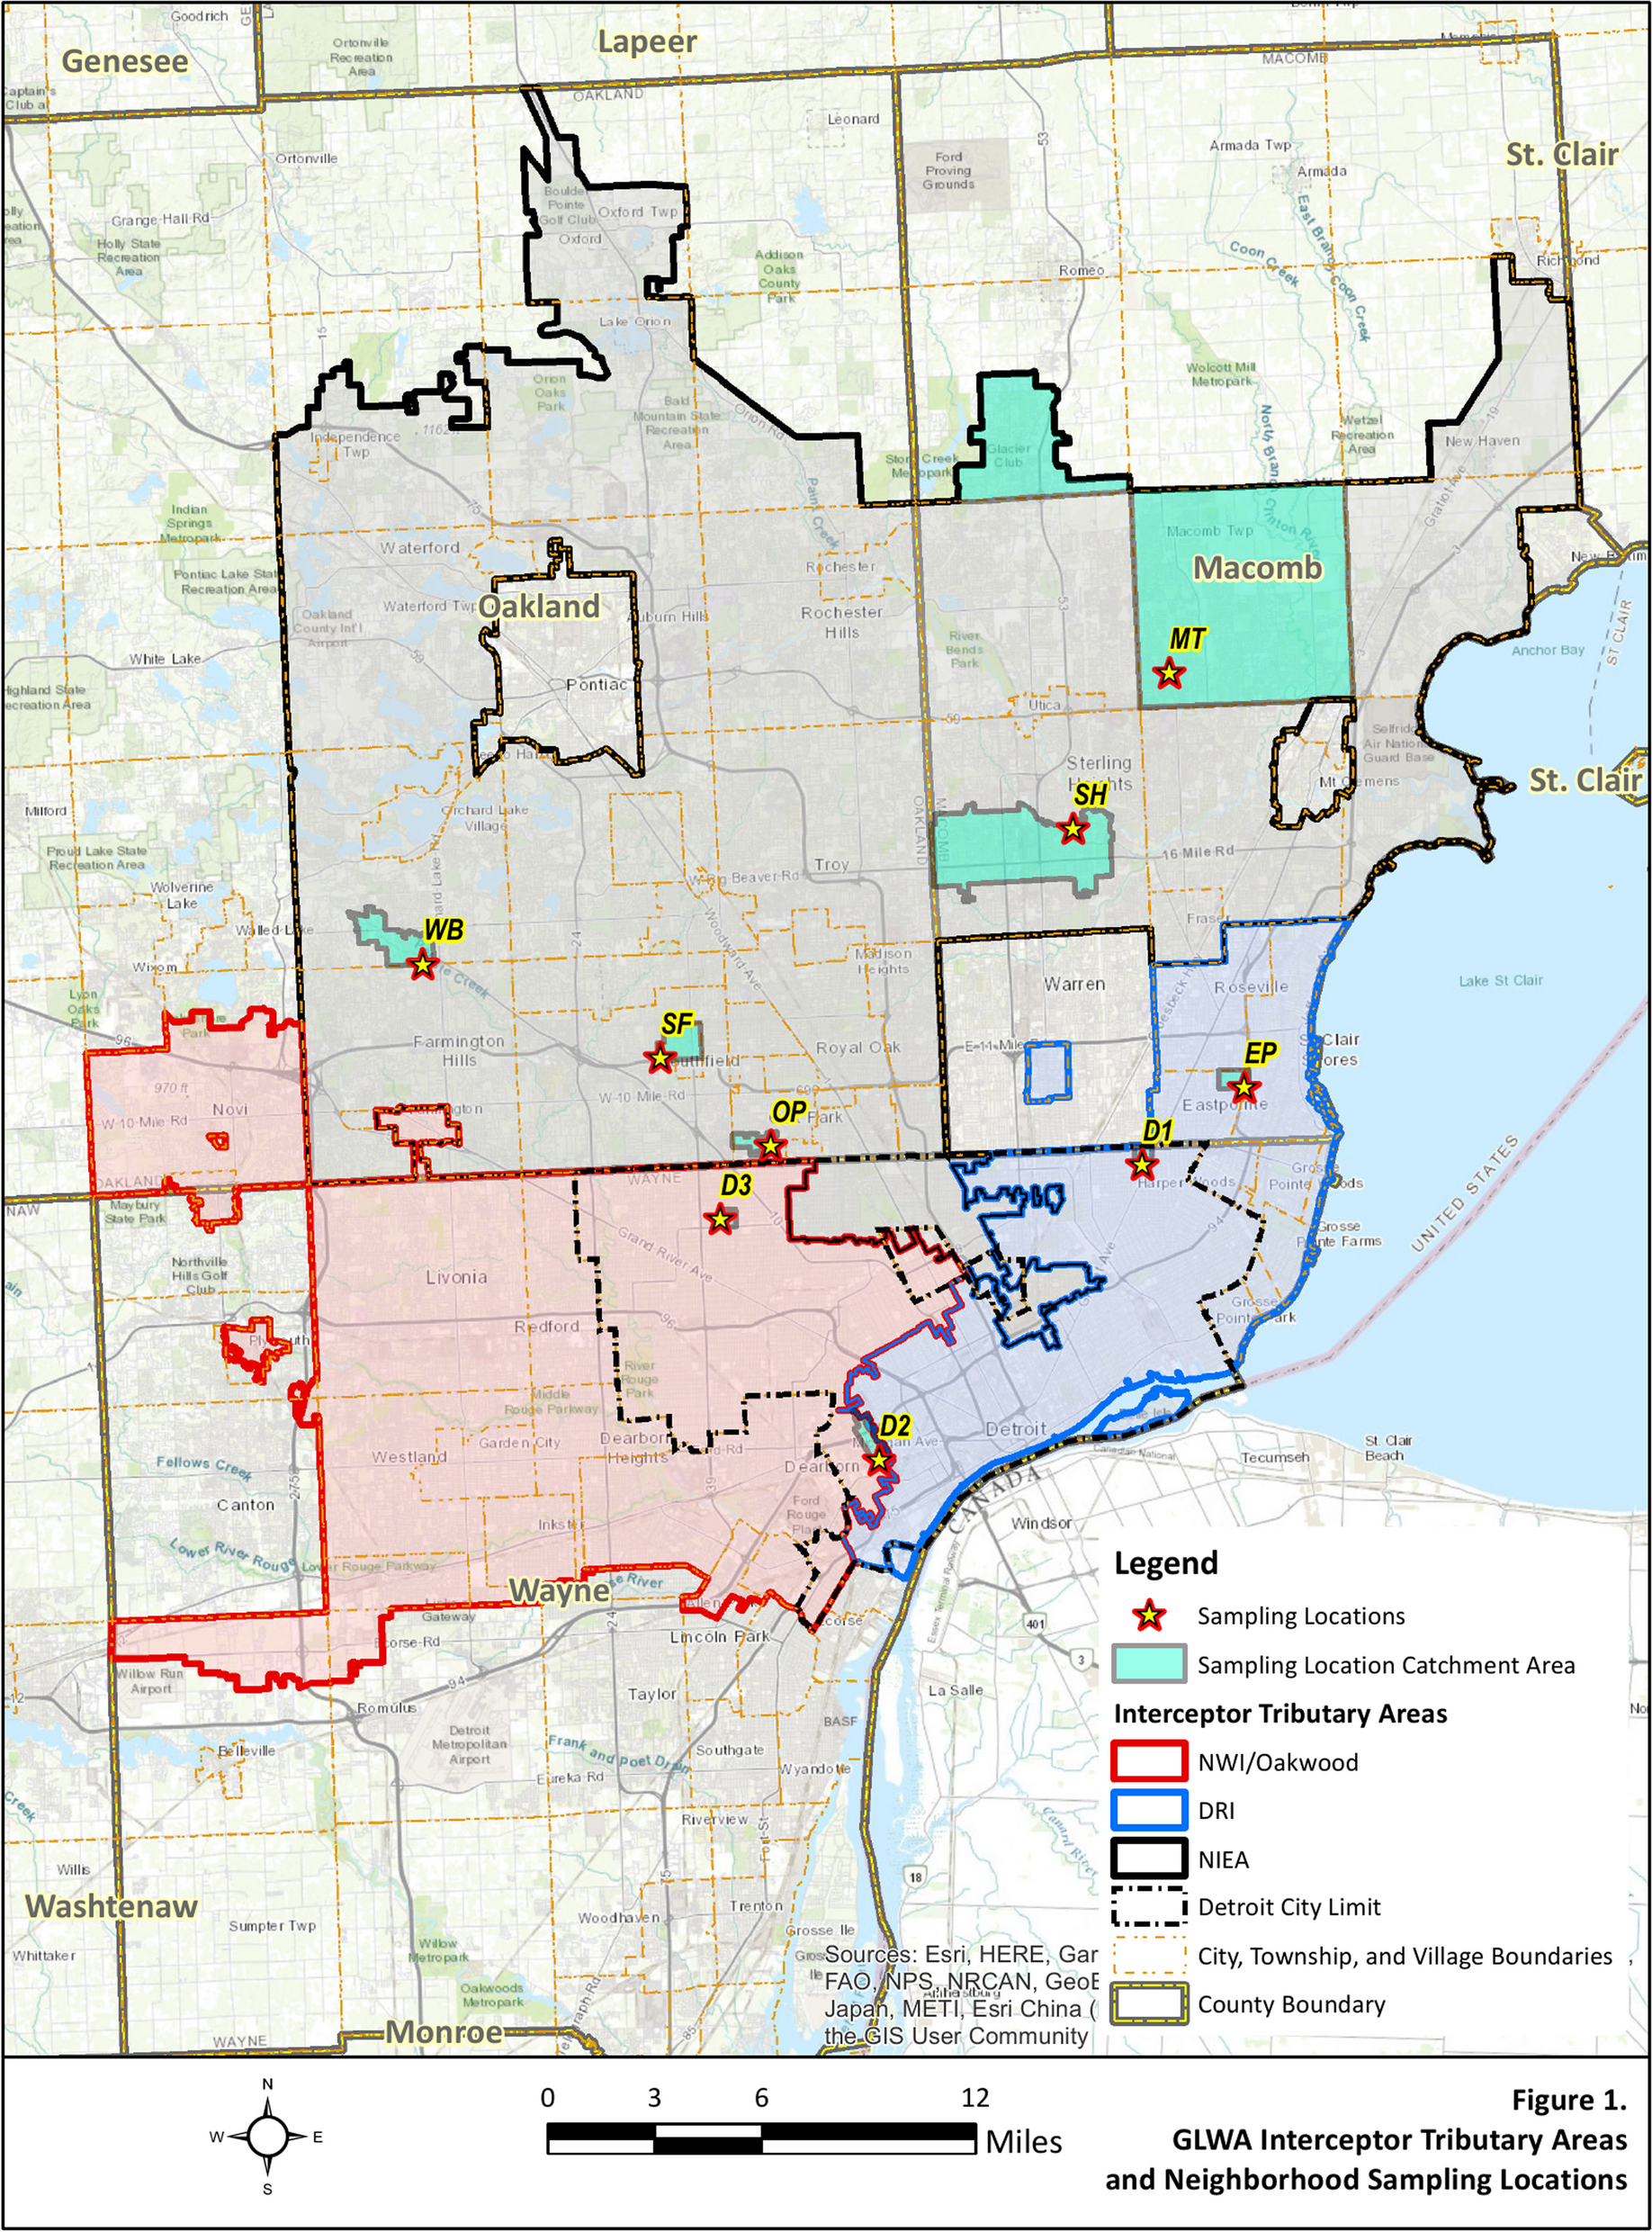 A broad wastewater screening and clinical data surveillance for virus-related diseases in the metropolitan Detroit area in Michigan